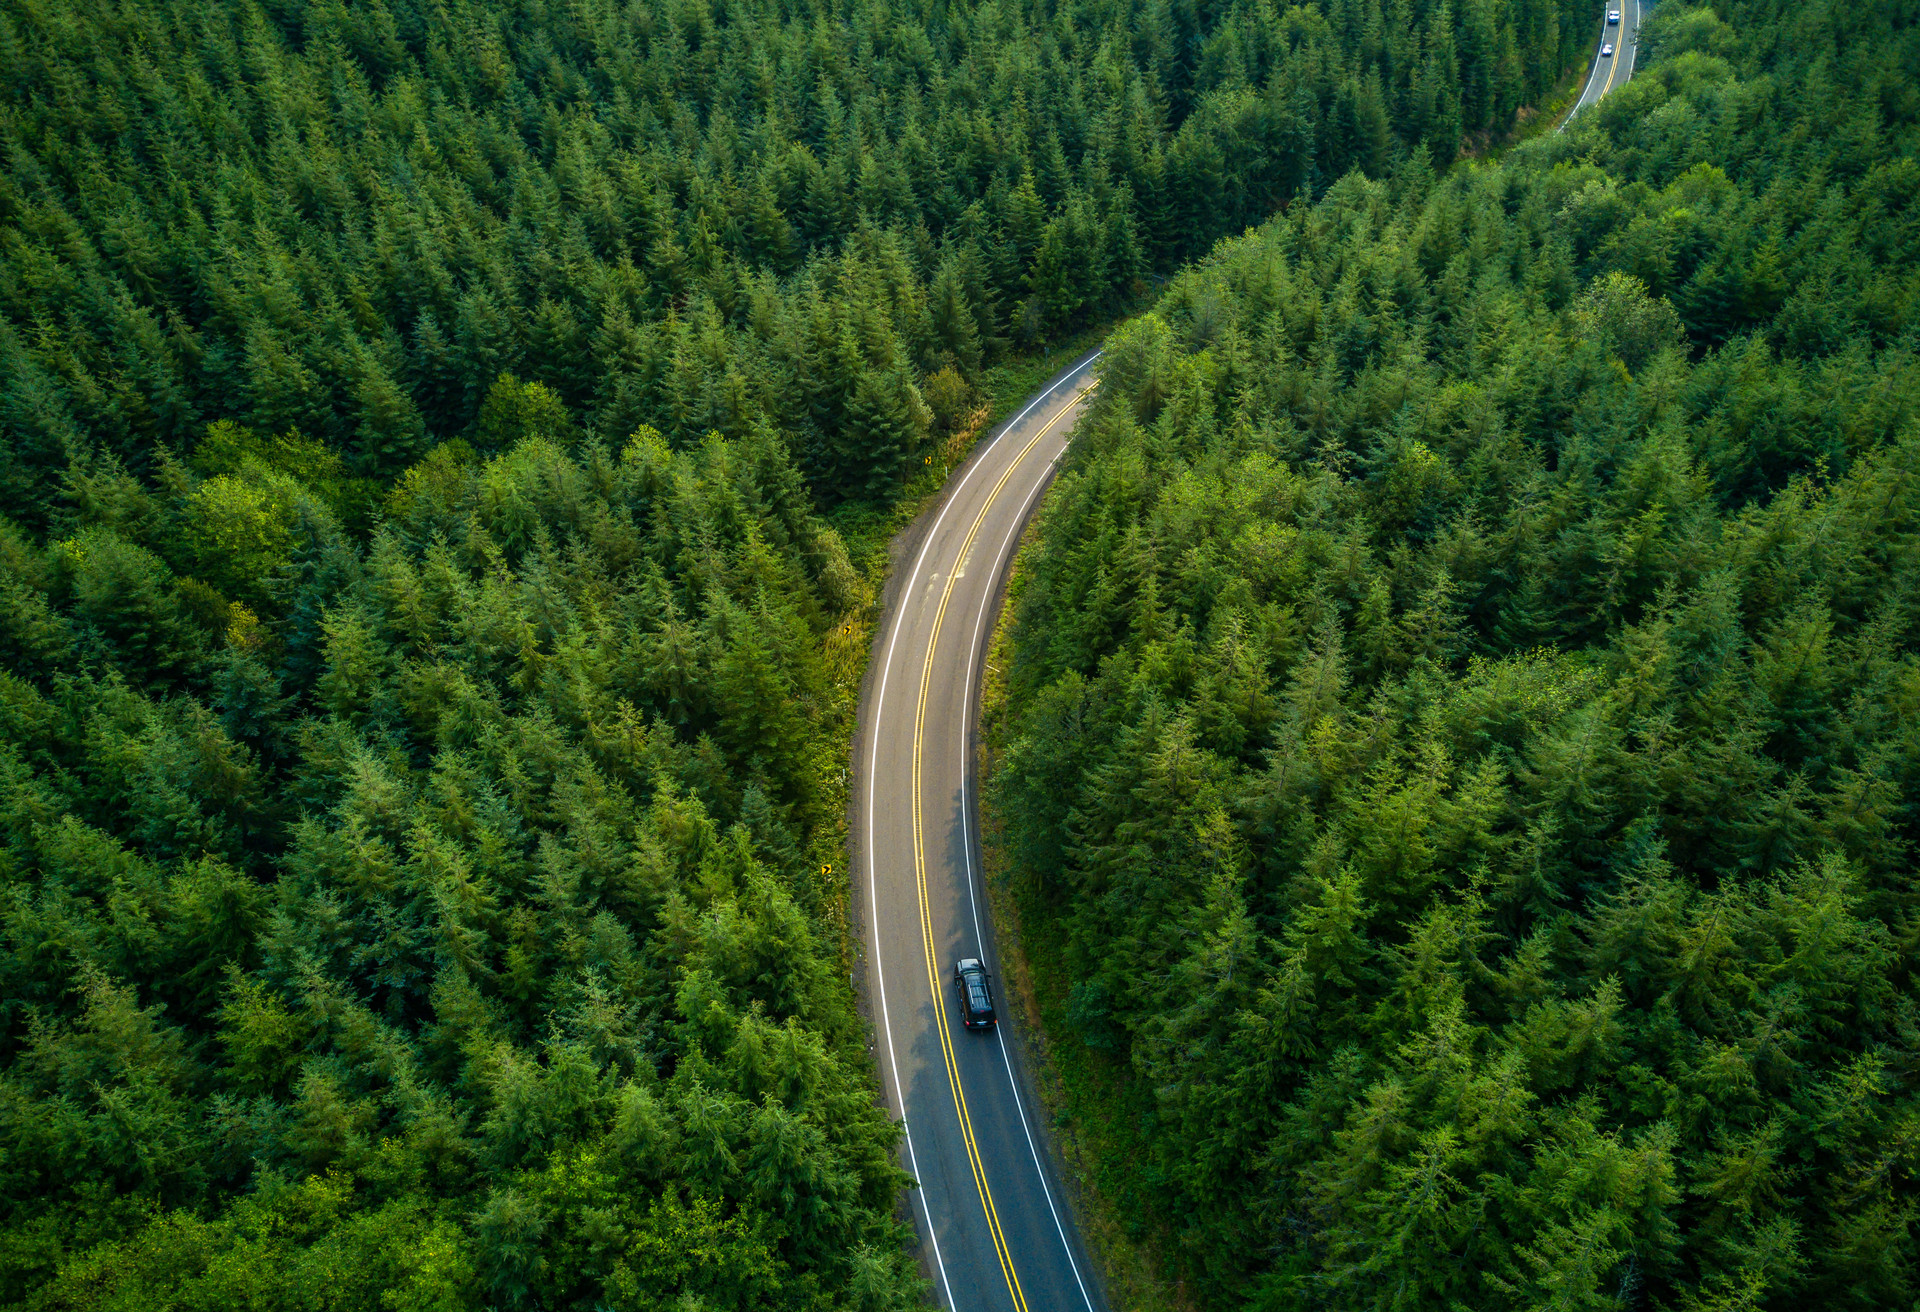 Aerial view of a road winding through managed evergreen forest in Grays harbor County, Washington, USA.